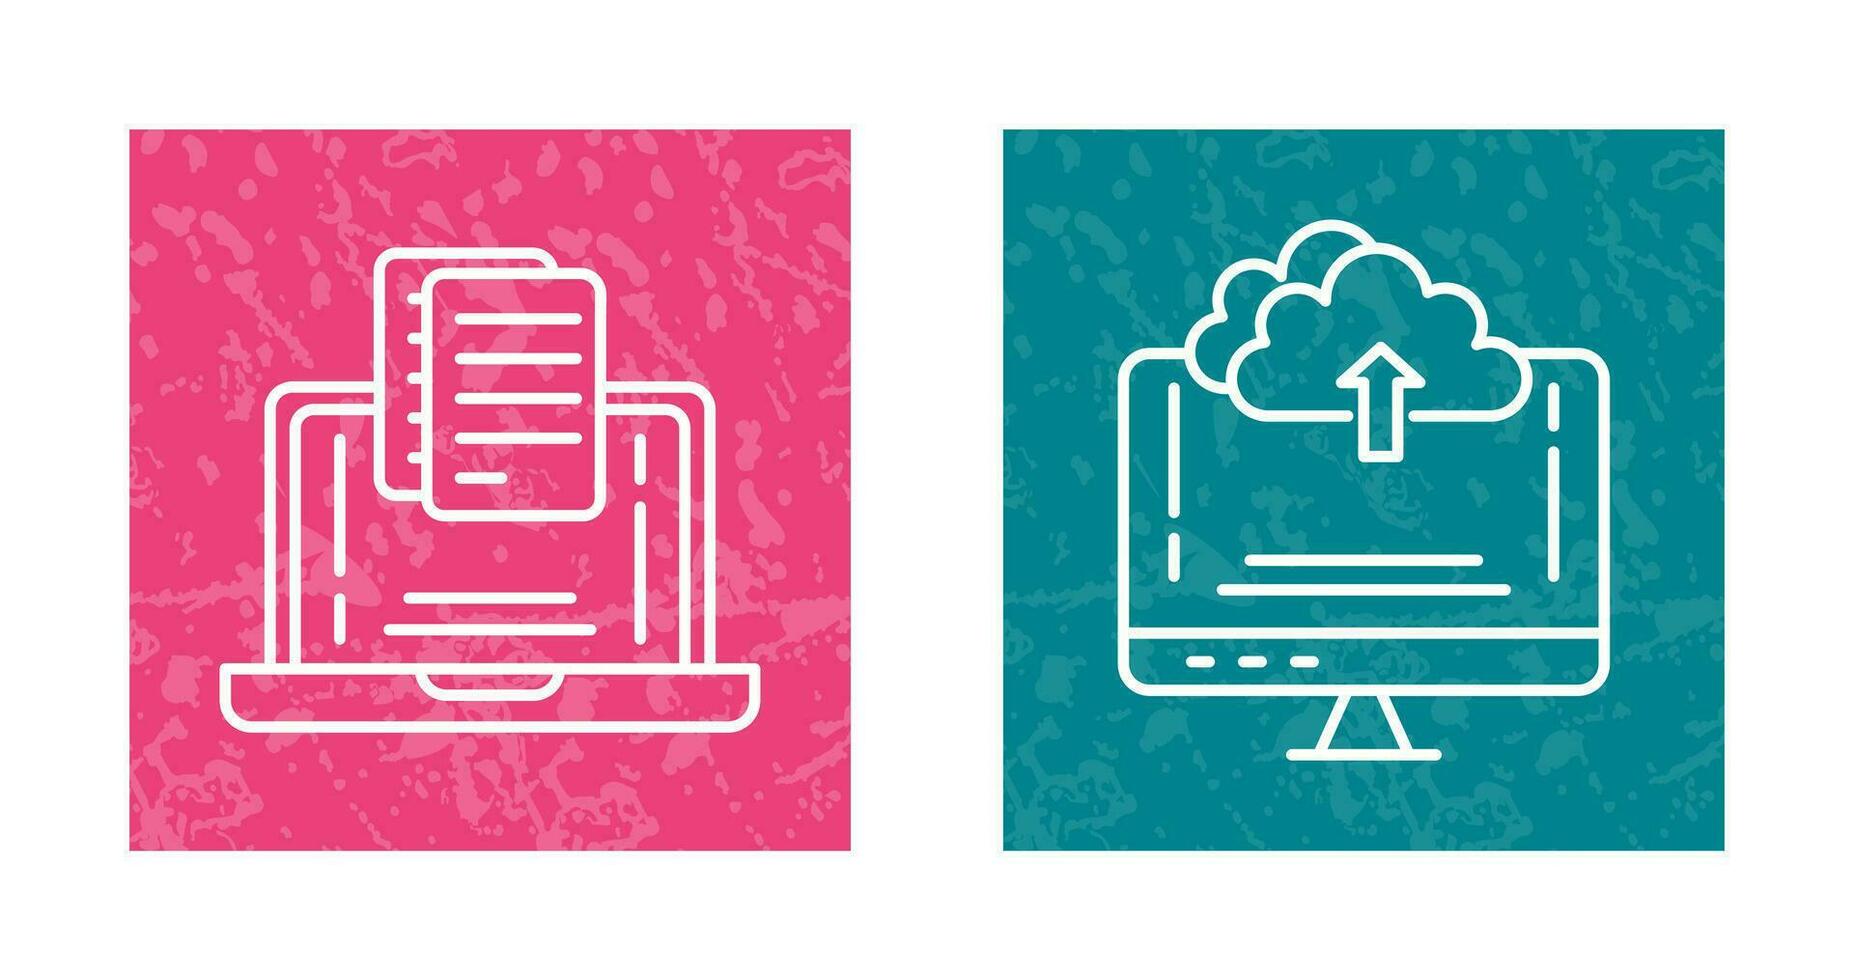 Document and Upload Icon vector